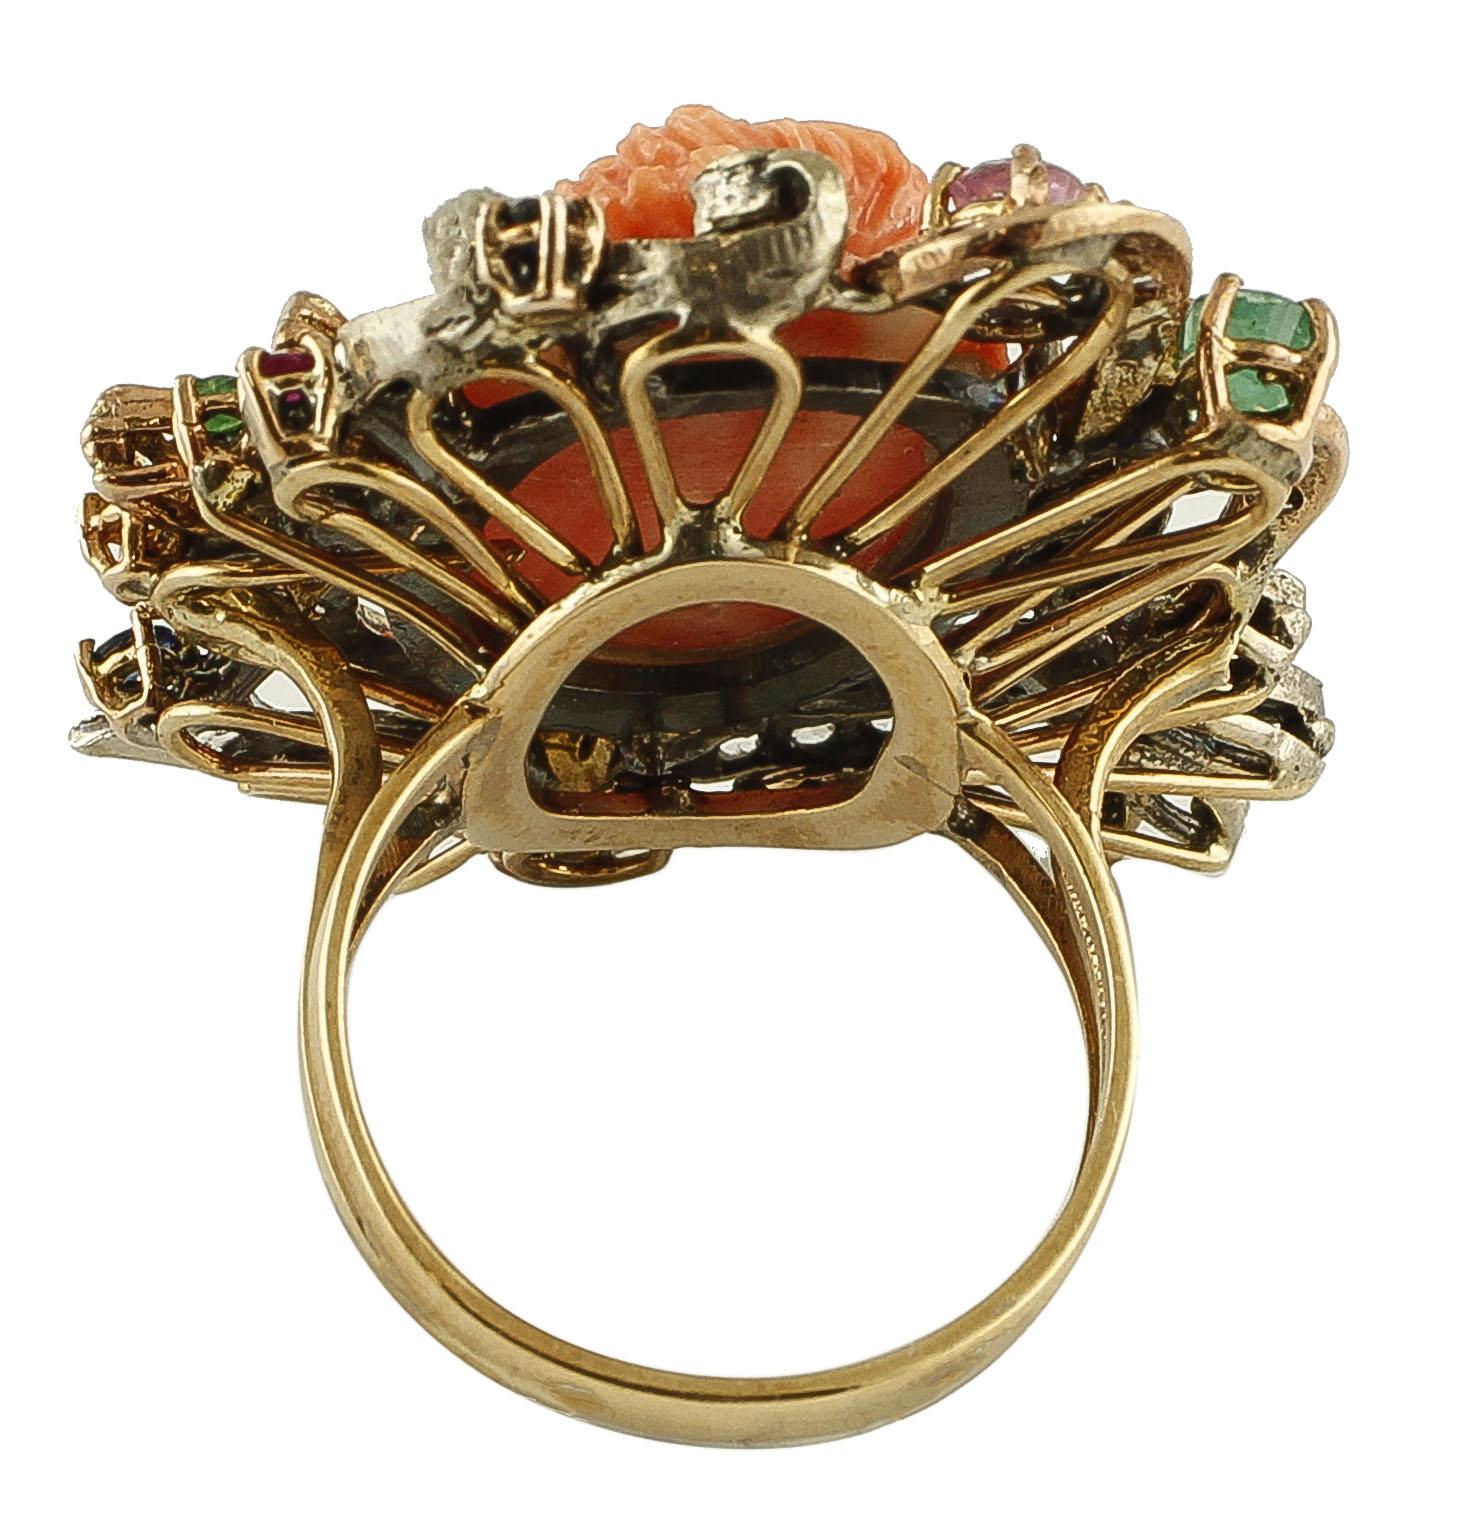 Brilliant Cut Coral Diamonds Rubies Emeralds Blue Sapphires 9 Karat Gold and Silver Retro Ring For Sale